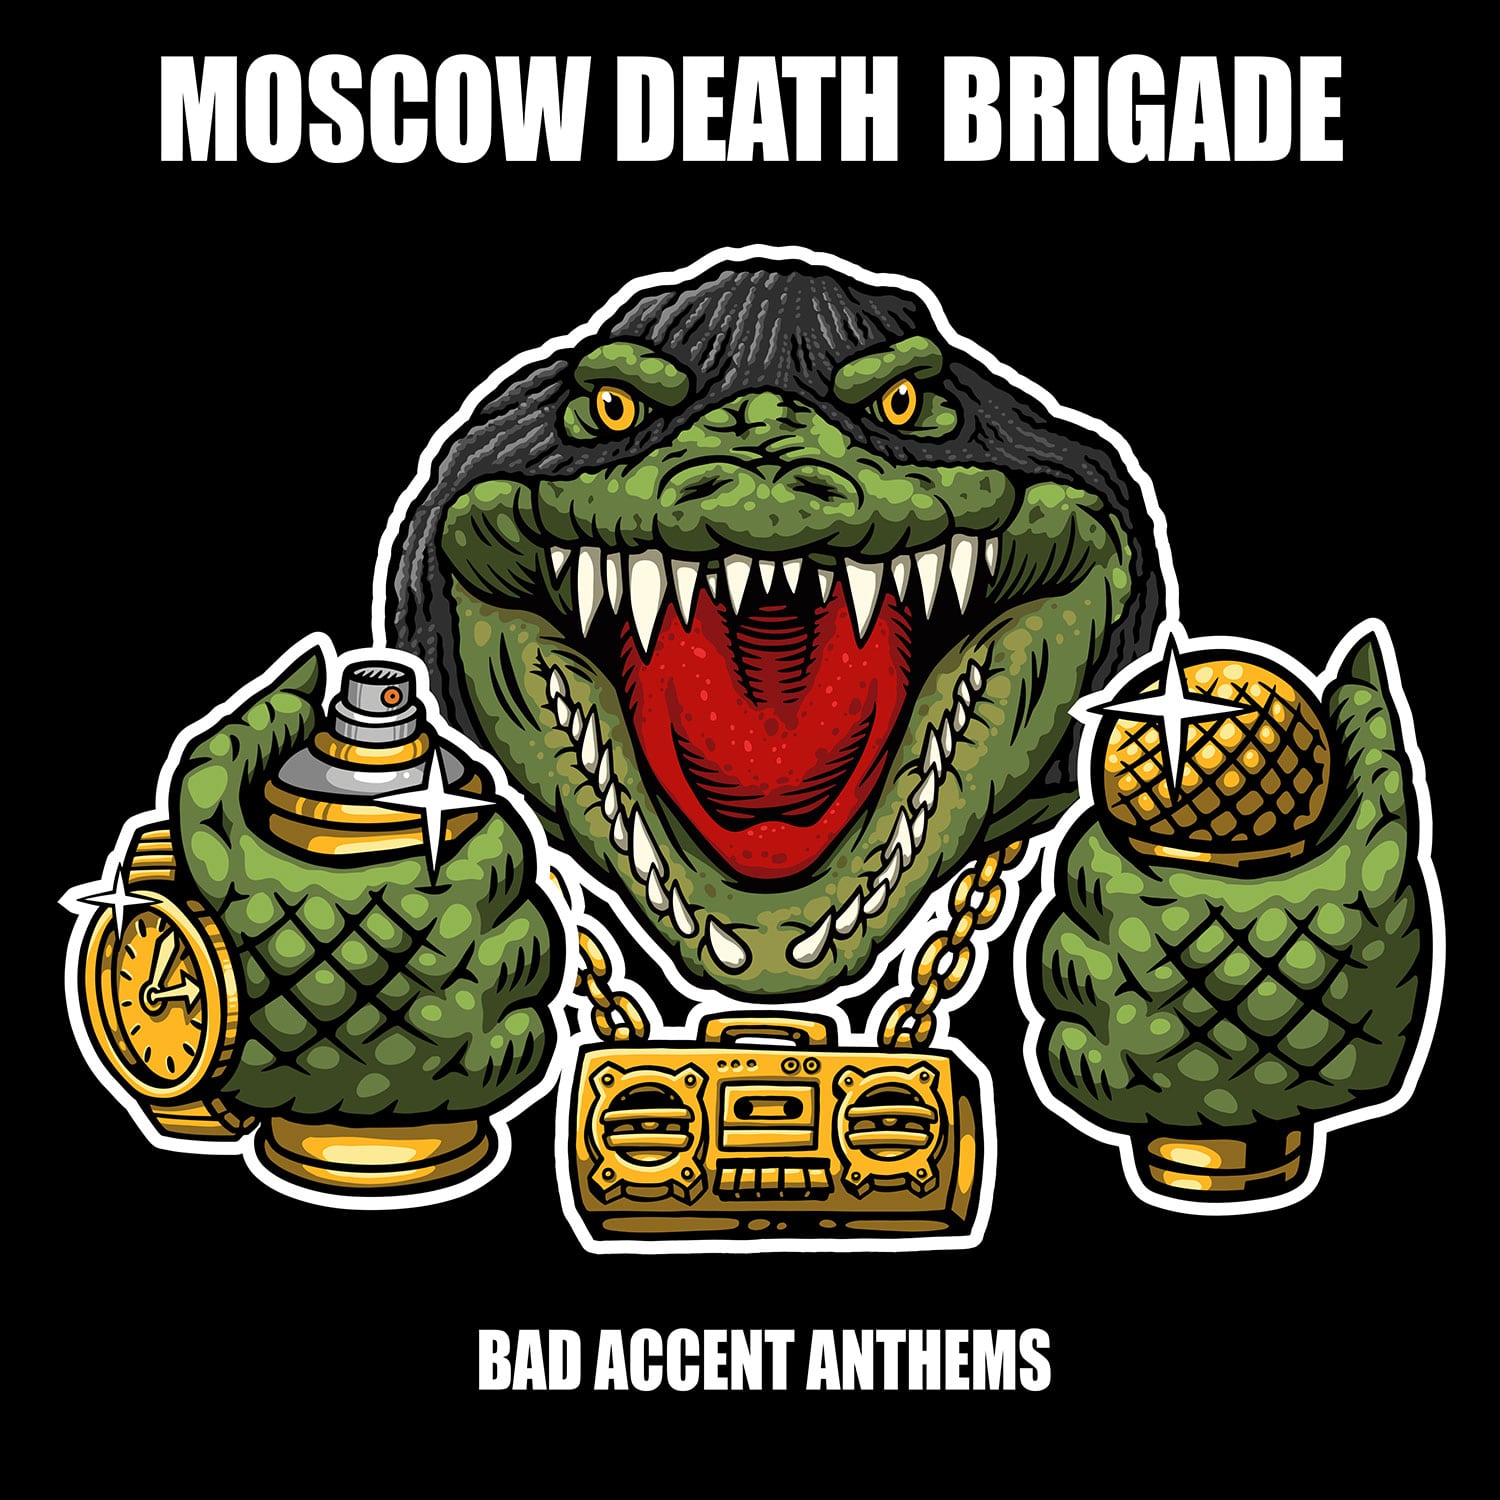 MOSCOW DEATH BRIGADE "Bad accent anthems" - LP